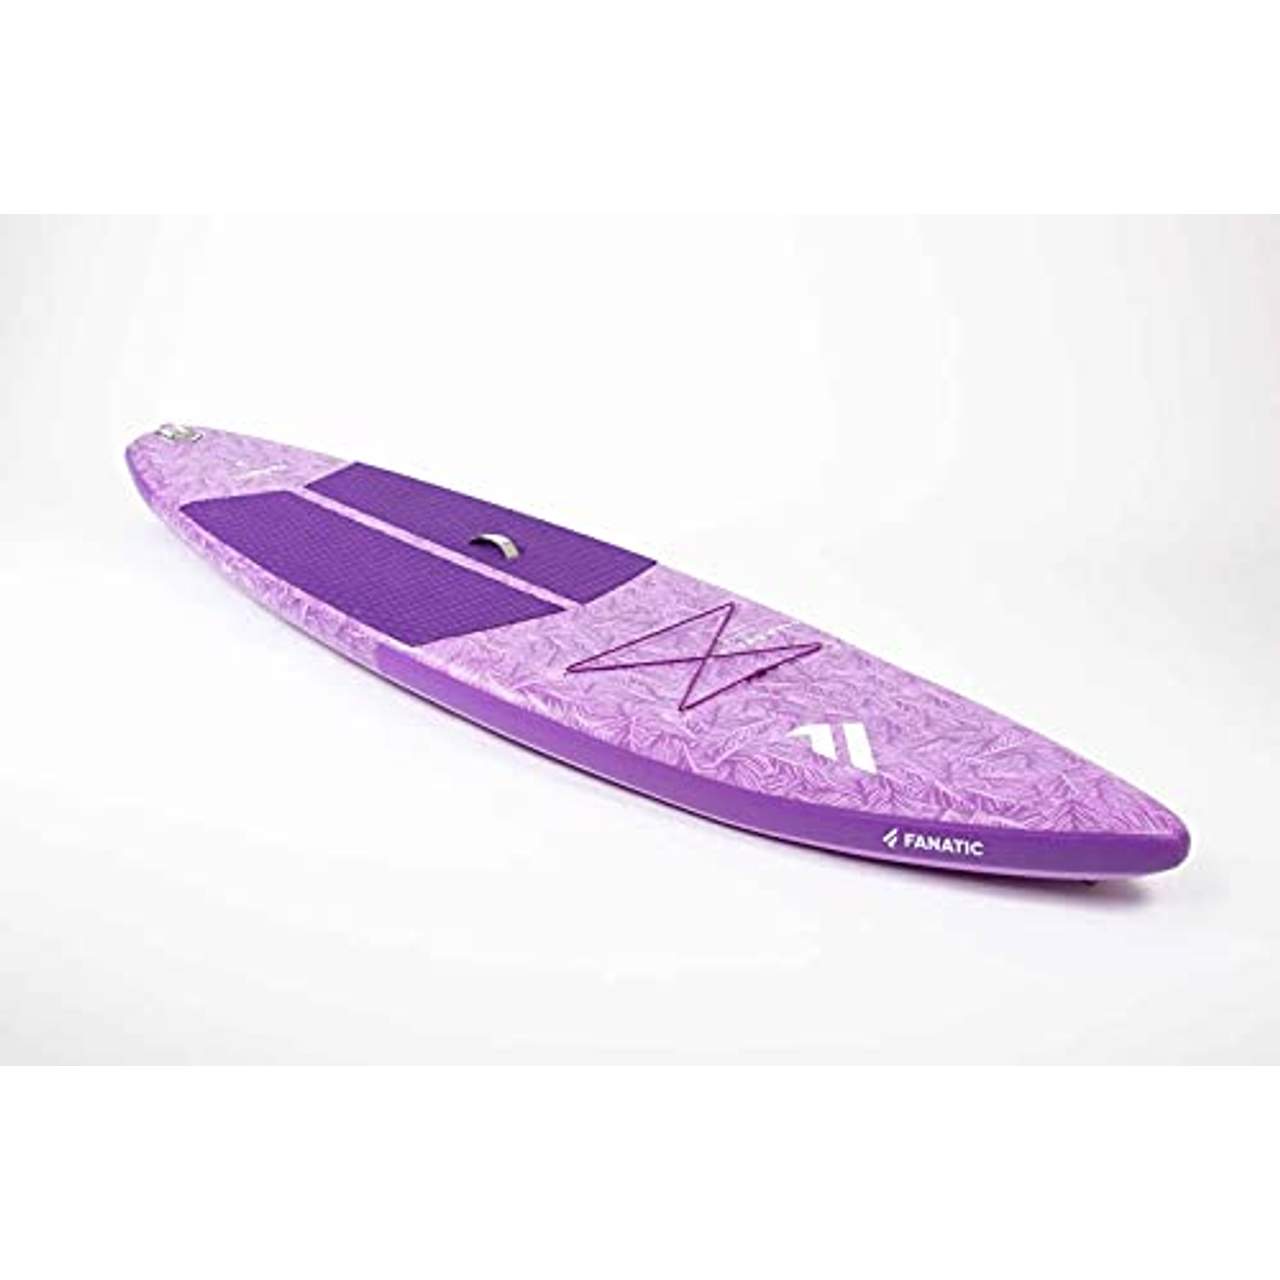 Fanatic 11'6 Diamond Air Touring Inflatable SUP